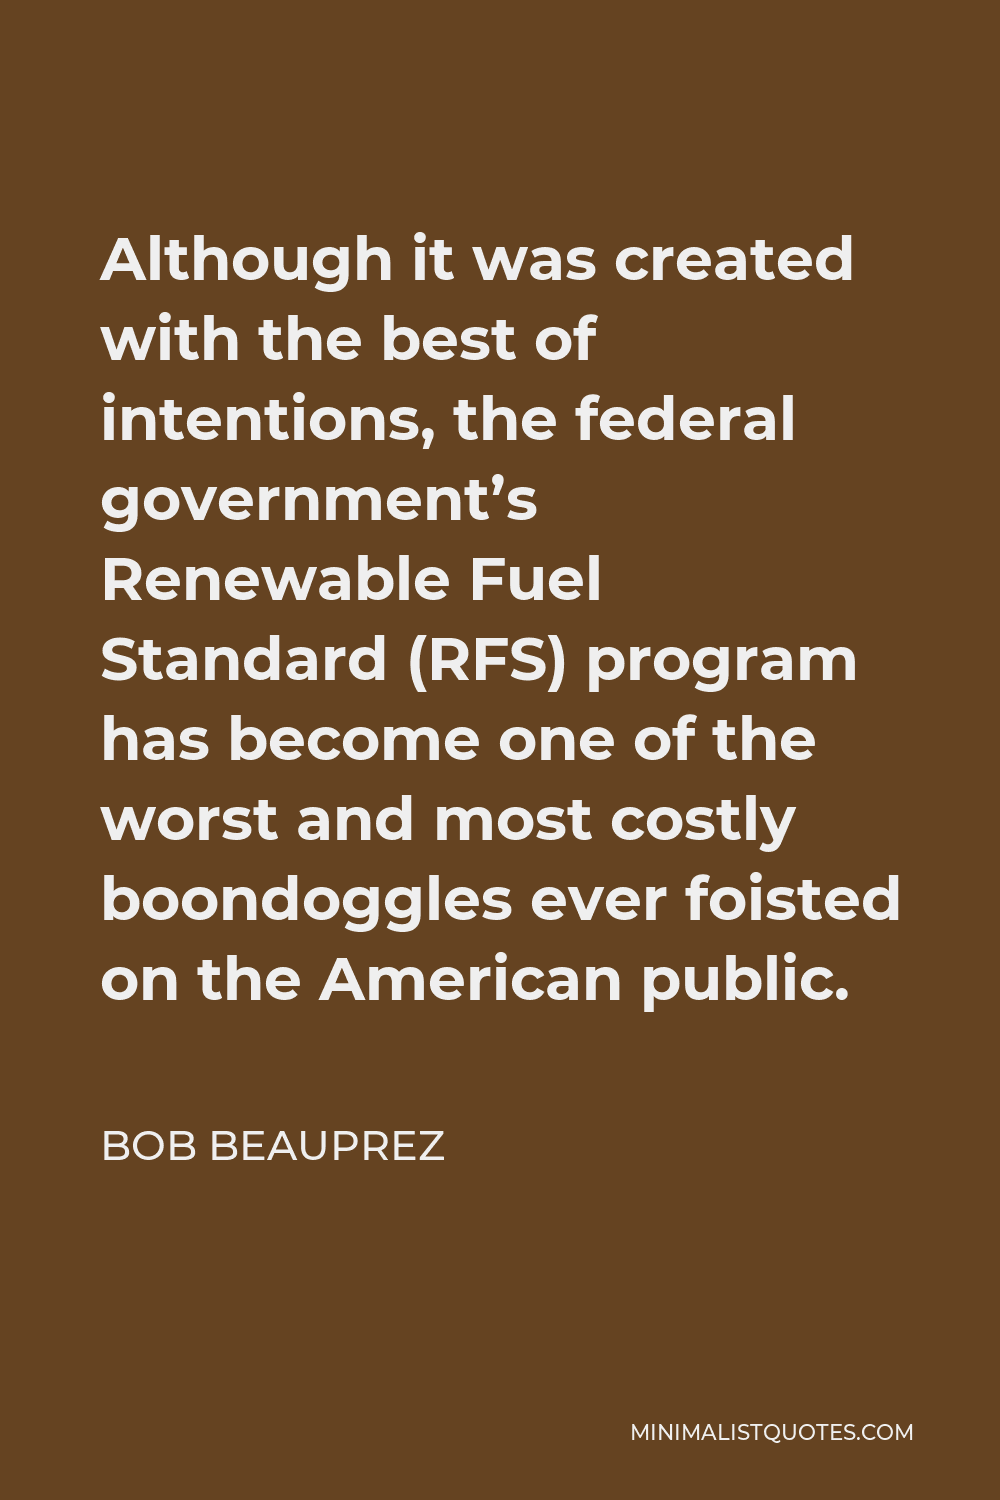 Bob Beauprez Quote - Although it was created with the best of intentions, the federal government’s Renewable Fuel Standard (RFS) program has become one of the worst and most costly boondoggles ever foisted on the American public.